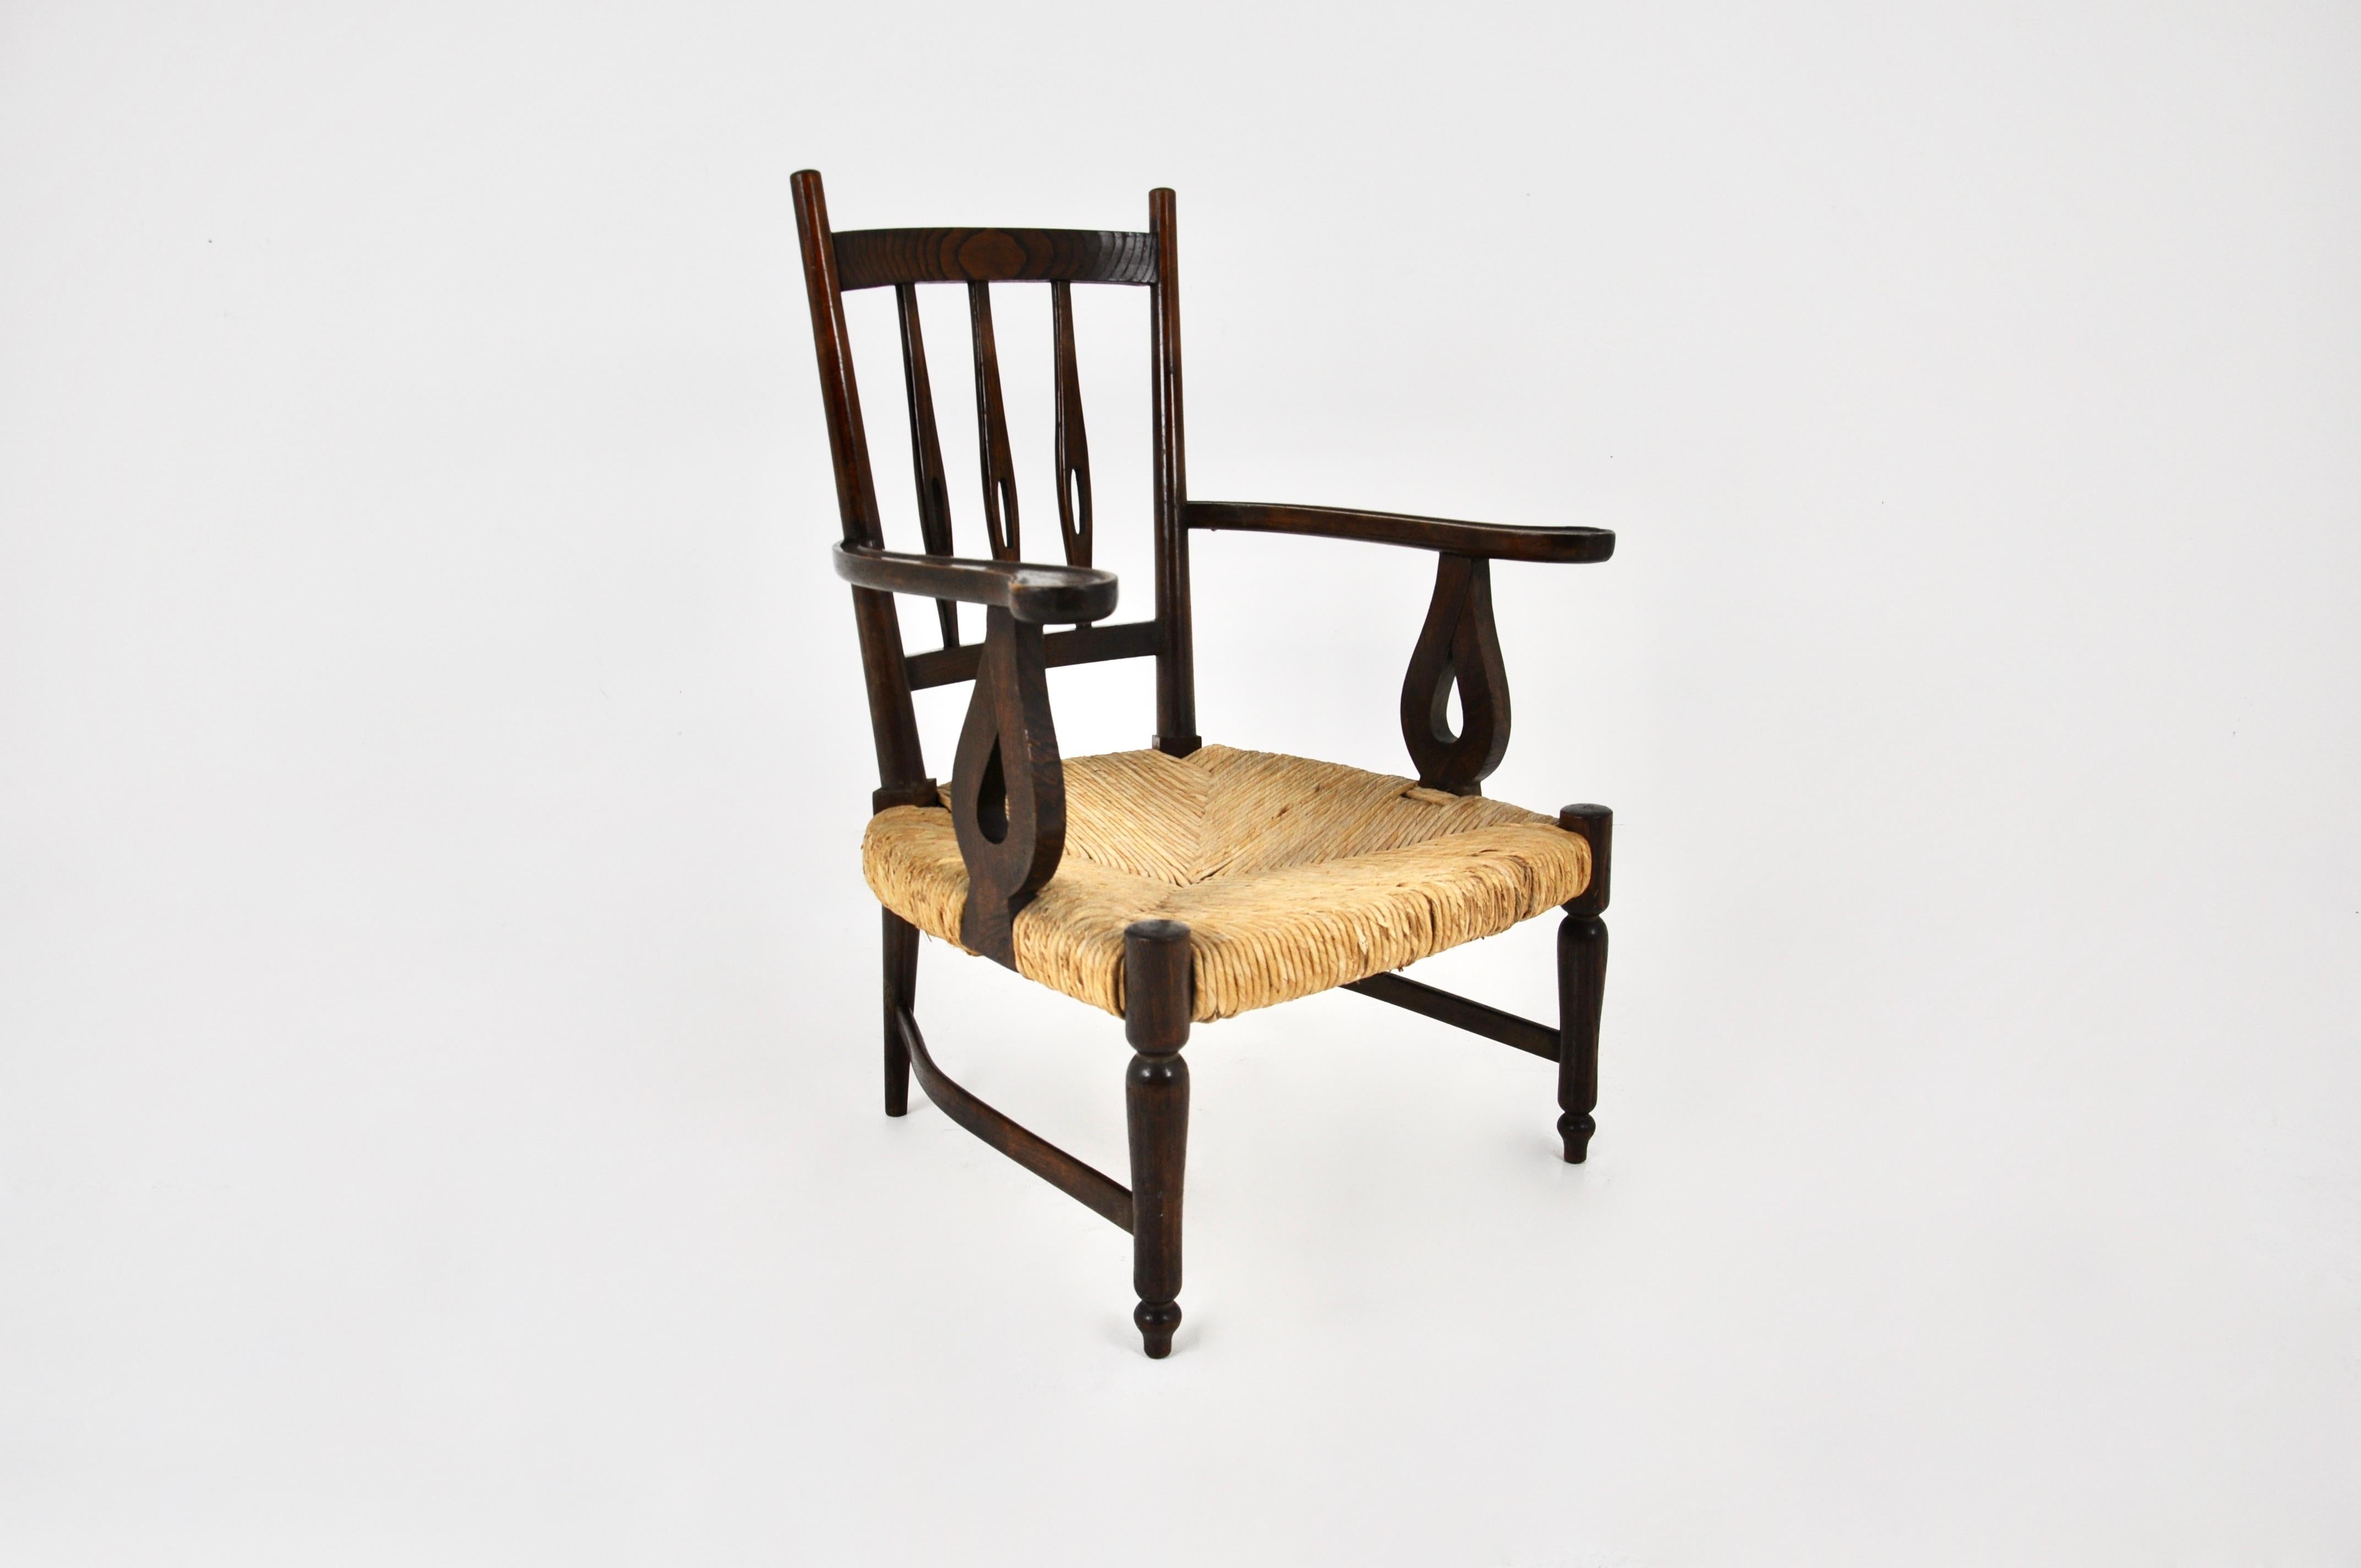 Wood and wicker armchair by Paolo Buffa made in the 50s.  Seat height: 32 cm. Wear due to time and age.